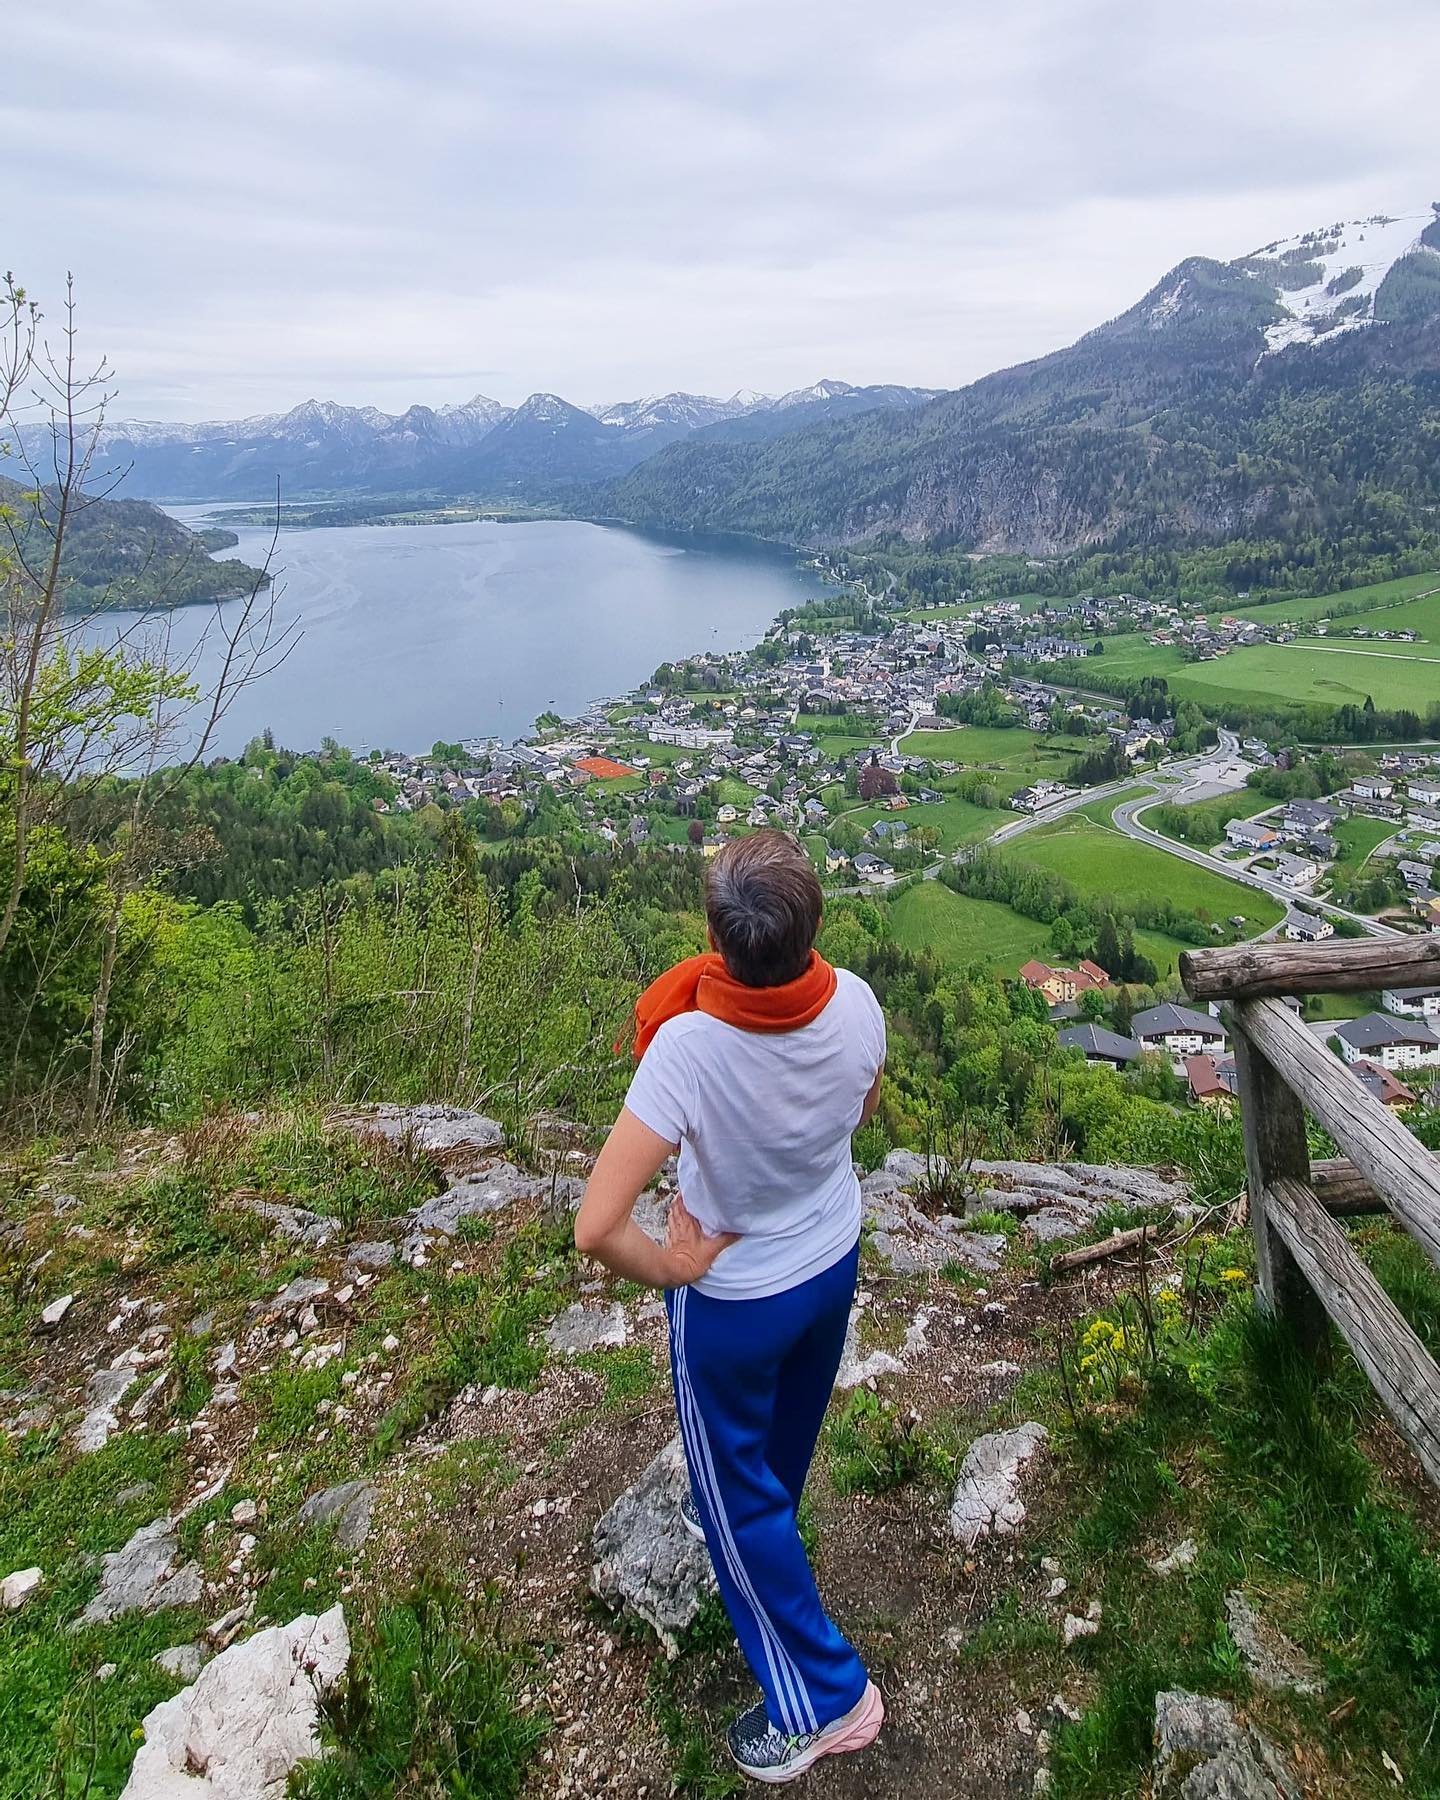 Short and interesting hike ended with the view of Wolfgangsee from the top. Catching up with the young ones!

#salzburg #wolfgangsee #hiking